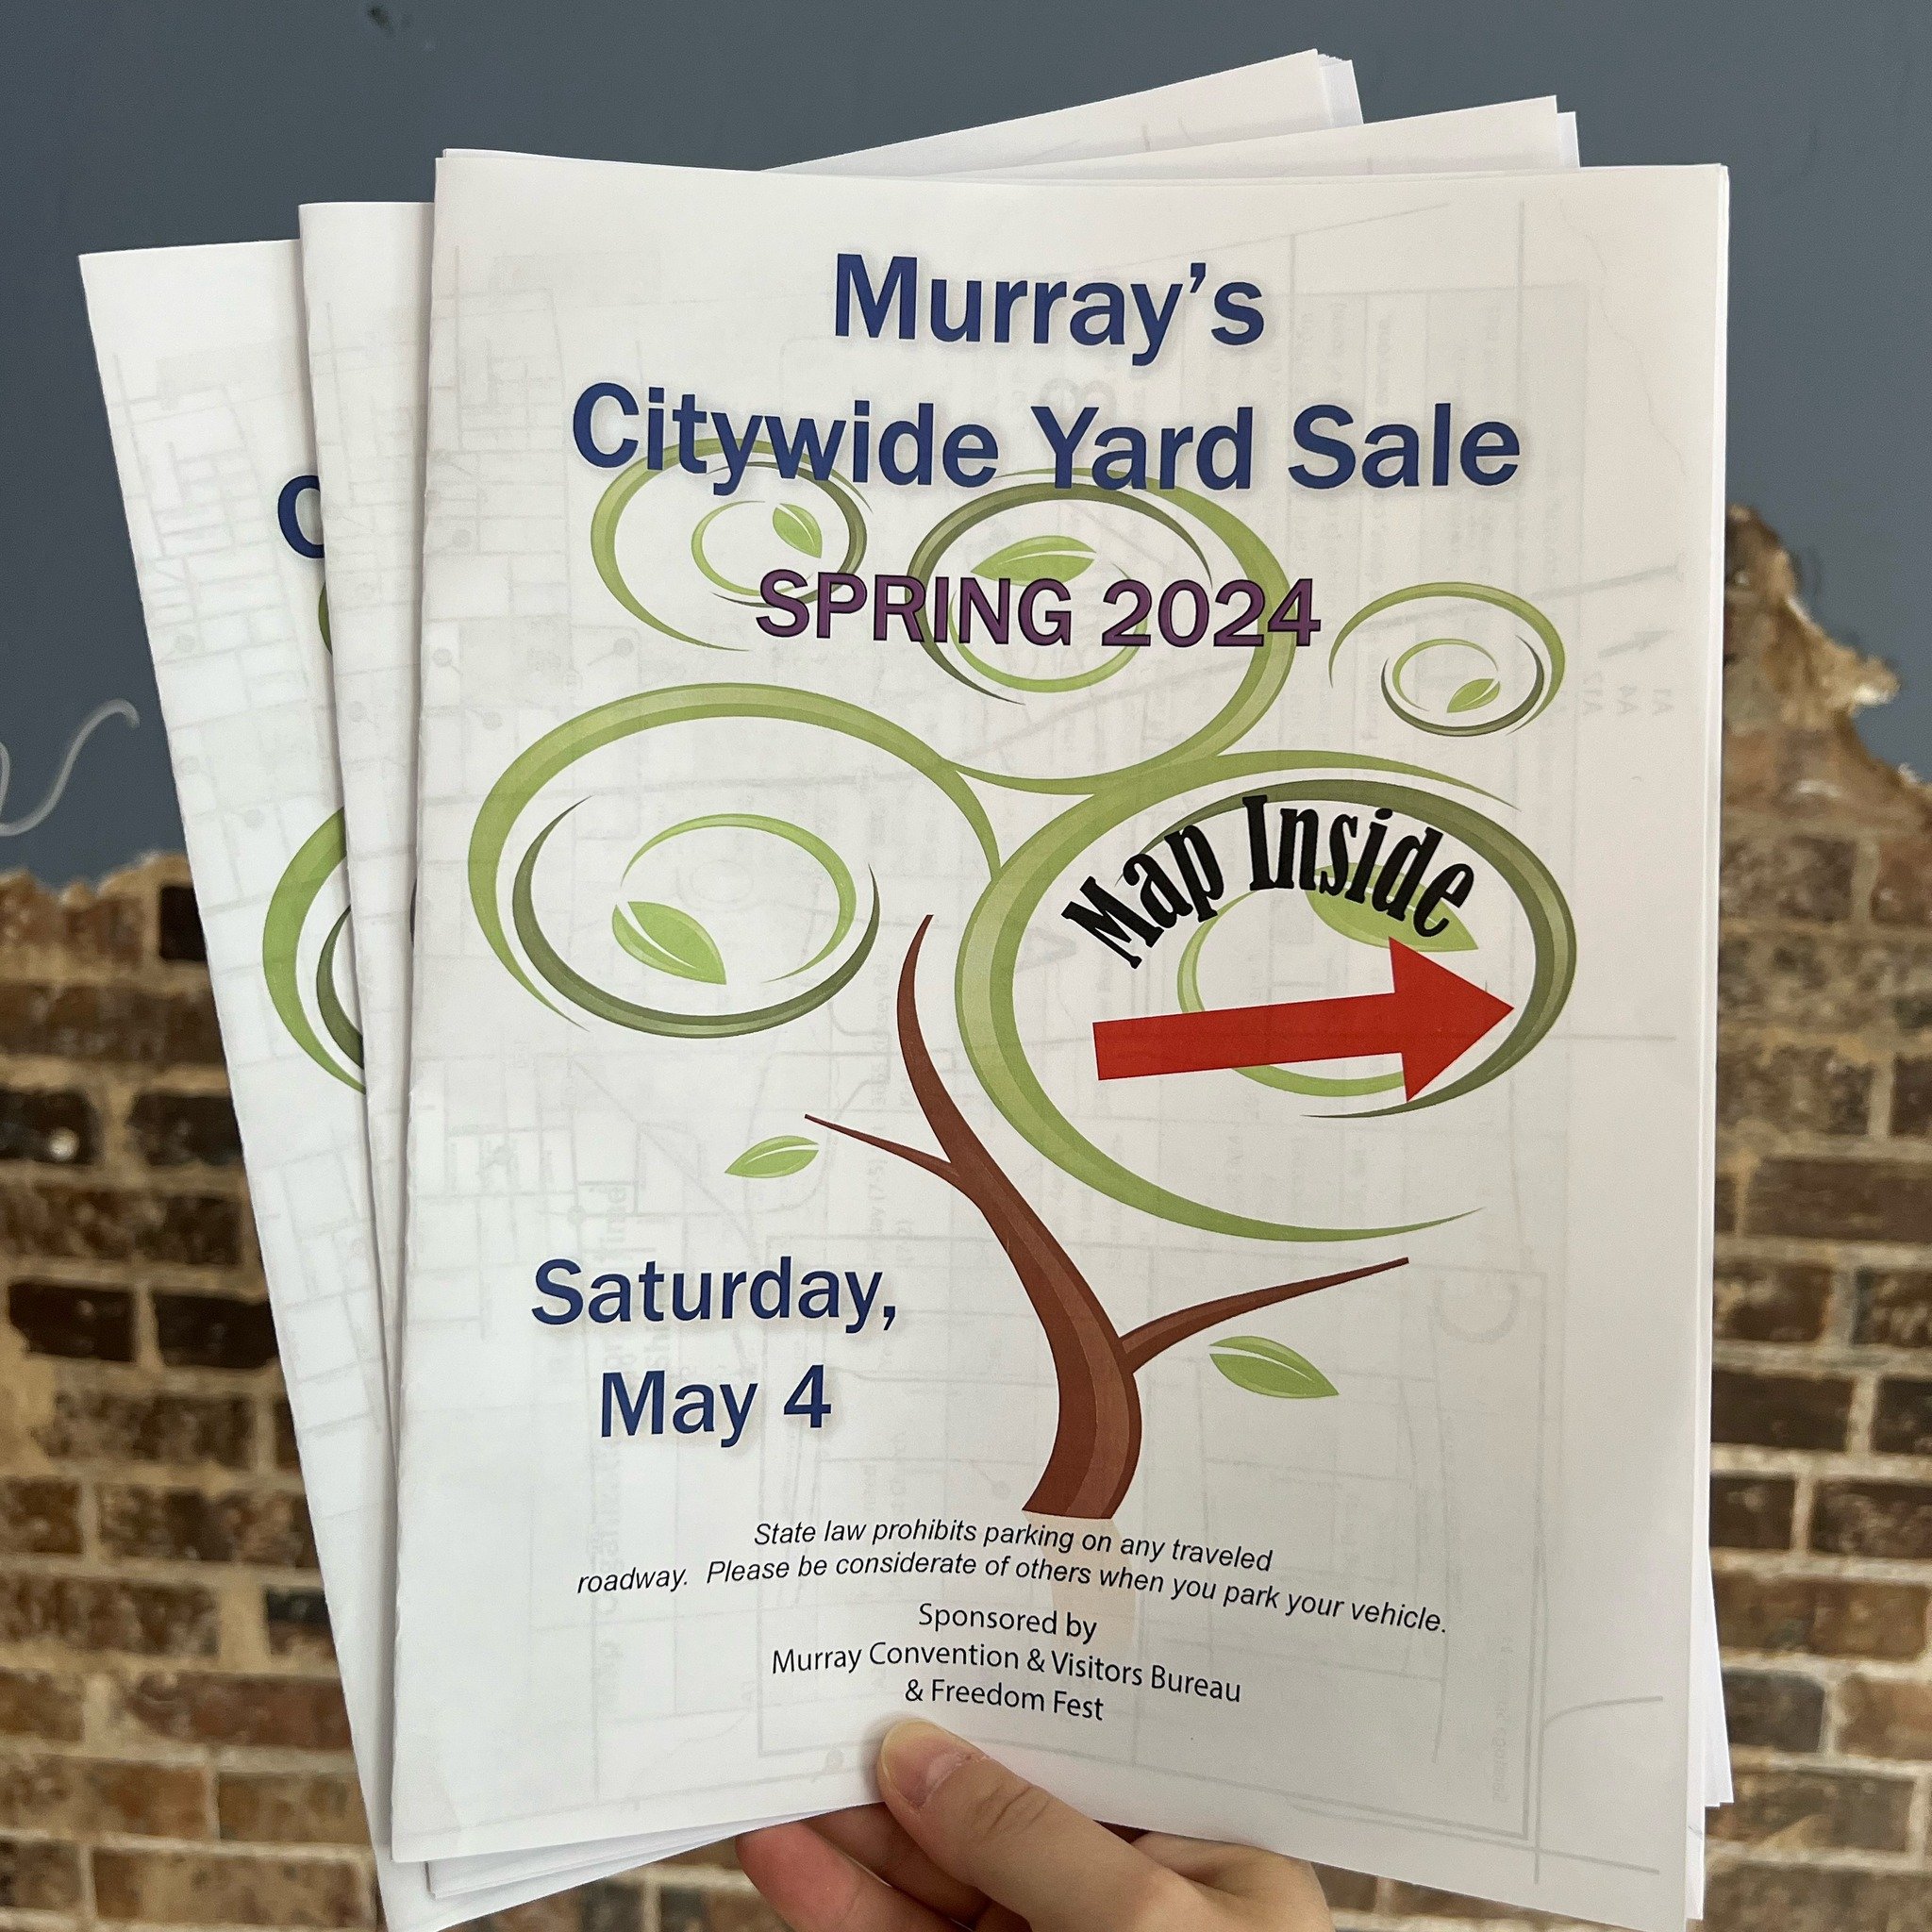 Spring Citywide Yard Sale Maps are hot off the press this morning🔥 Maps are available to purchase from now until 9 a.m. Saturday morning! Get your copy for $3 online (link in bio) or in our office at 206 S. 4th St. in downtown Murray. 

#MurrayKY #M